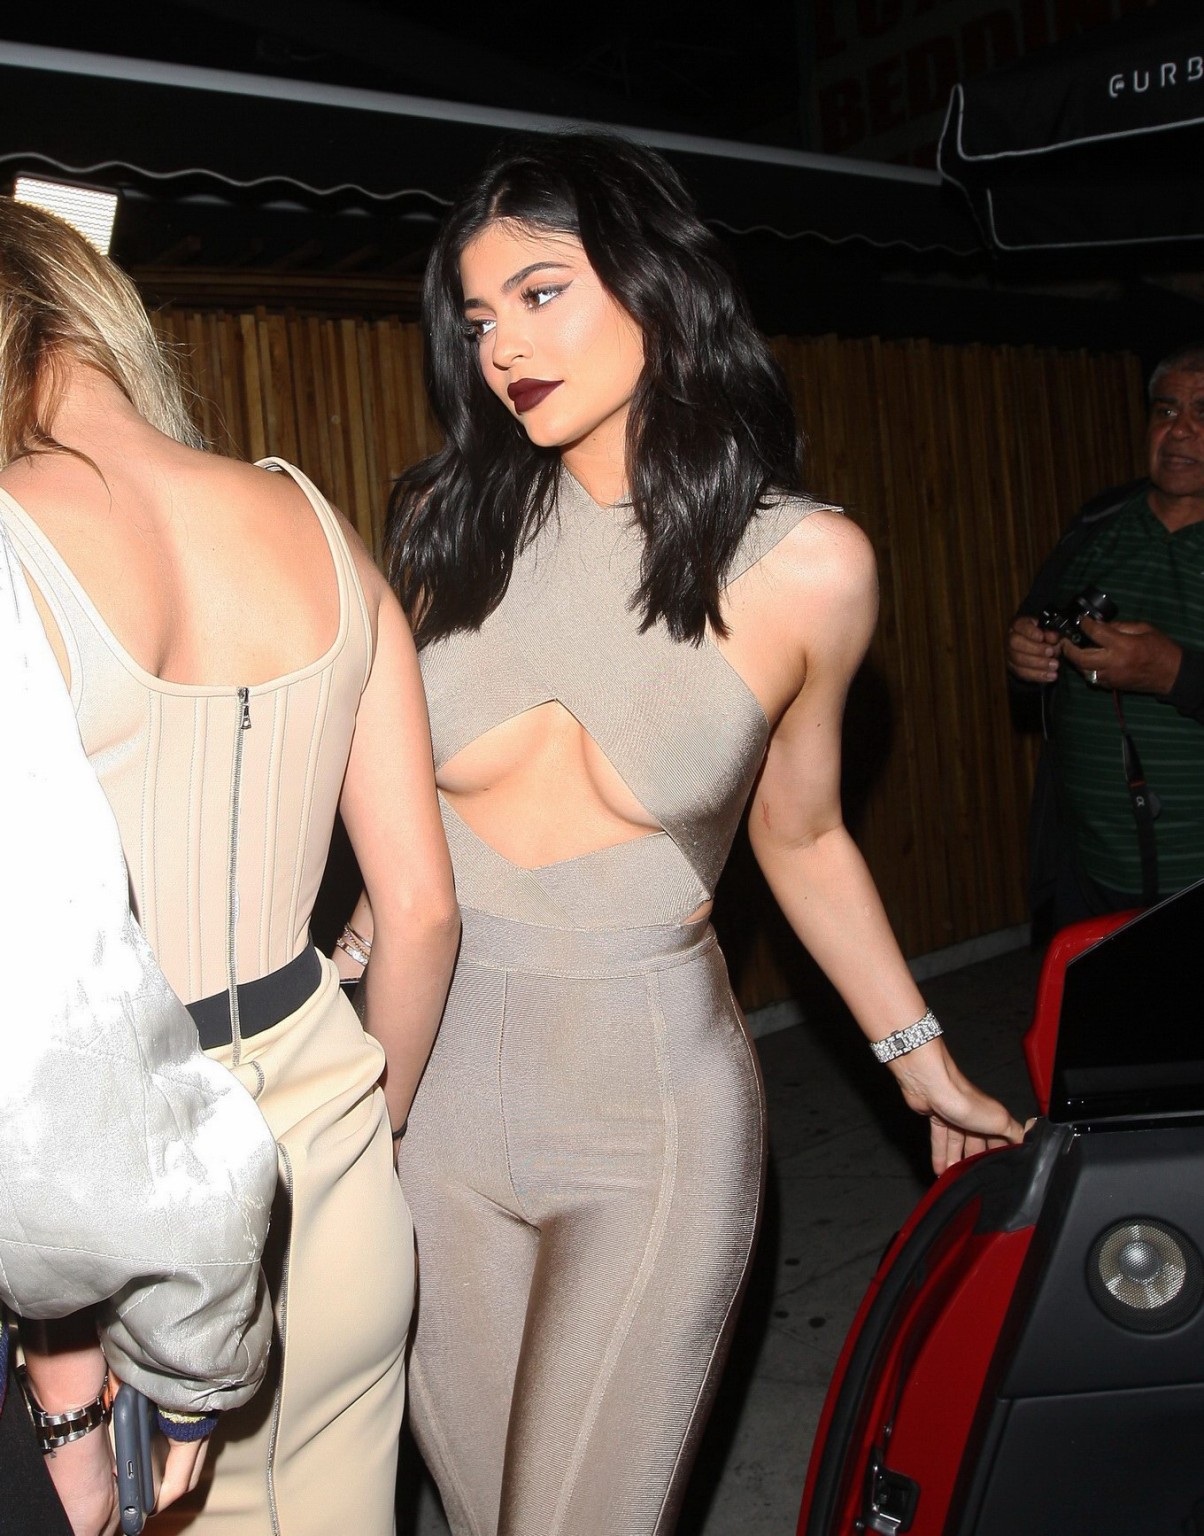 Kylie Jenner braless showing underboobs and butt #75141402